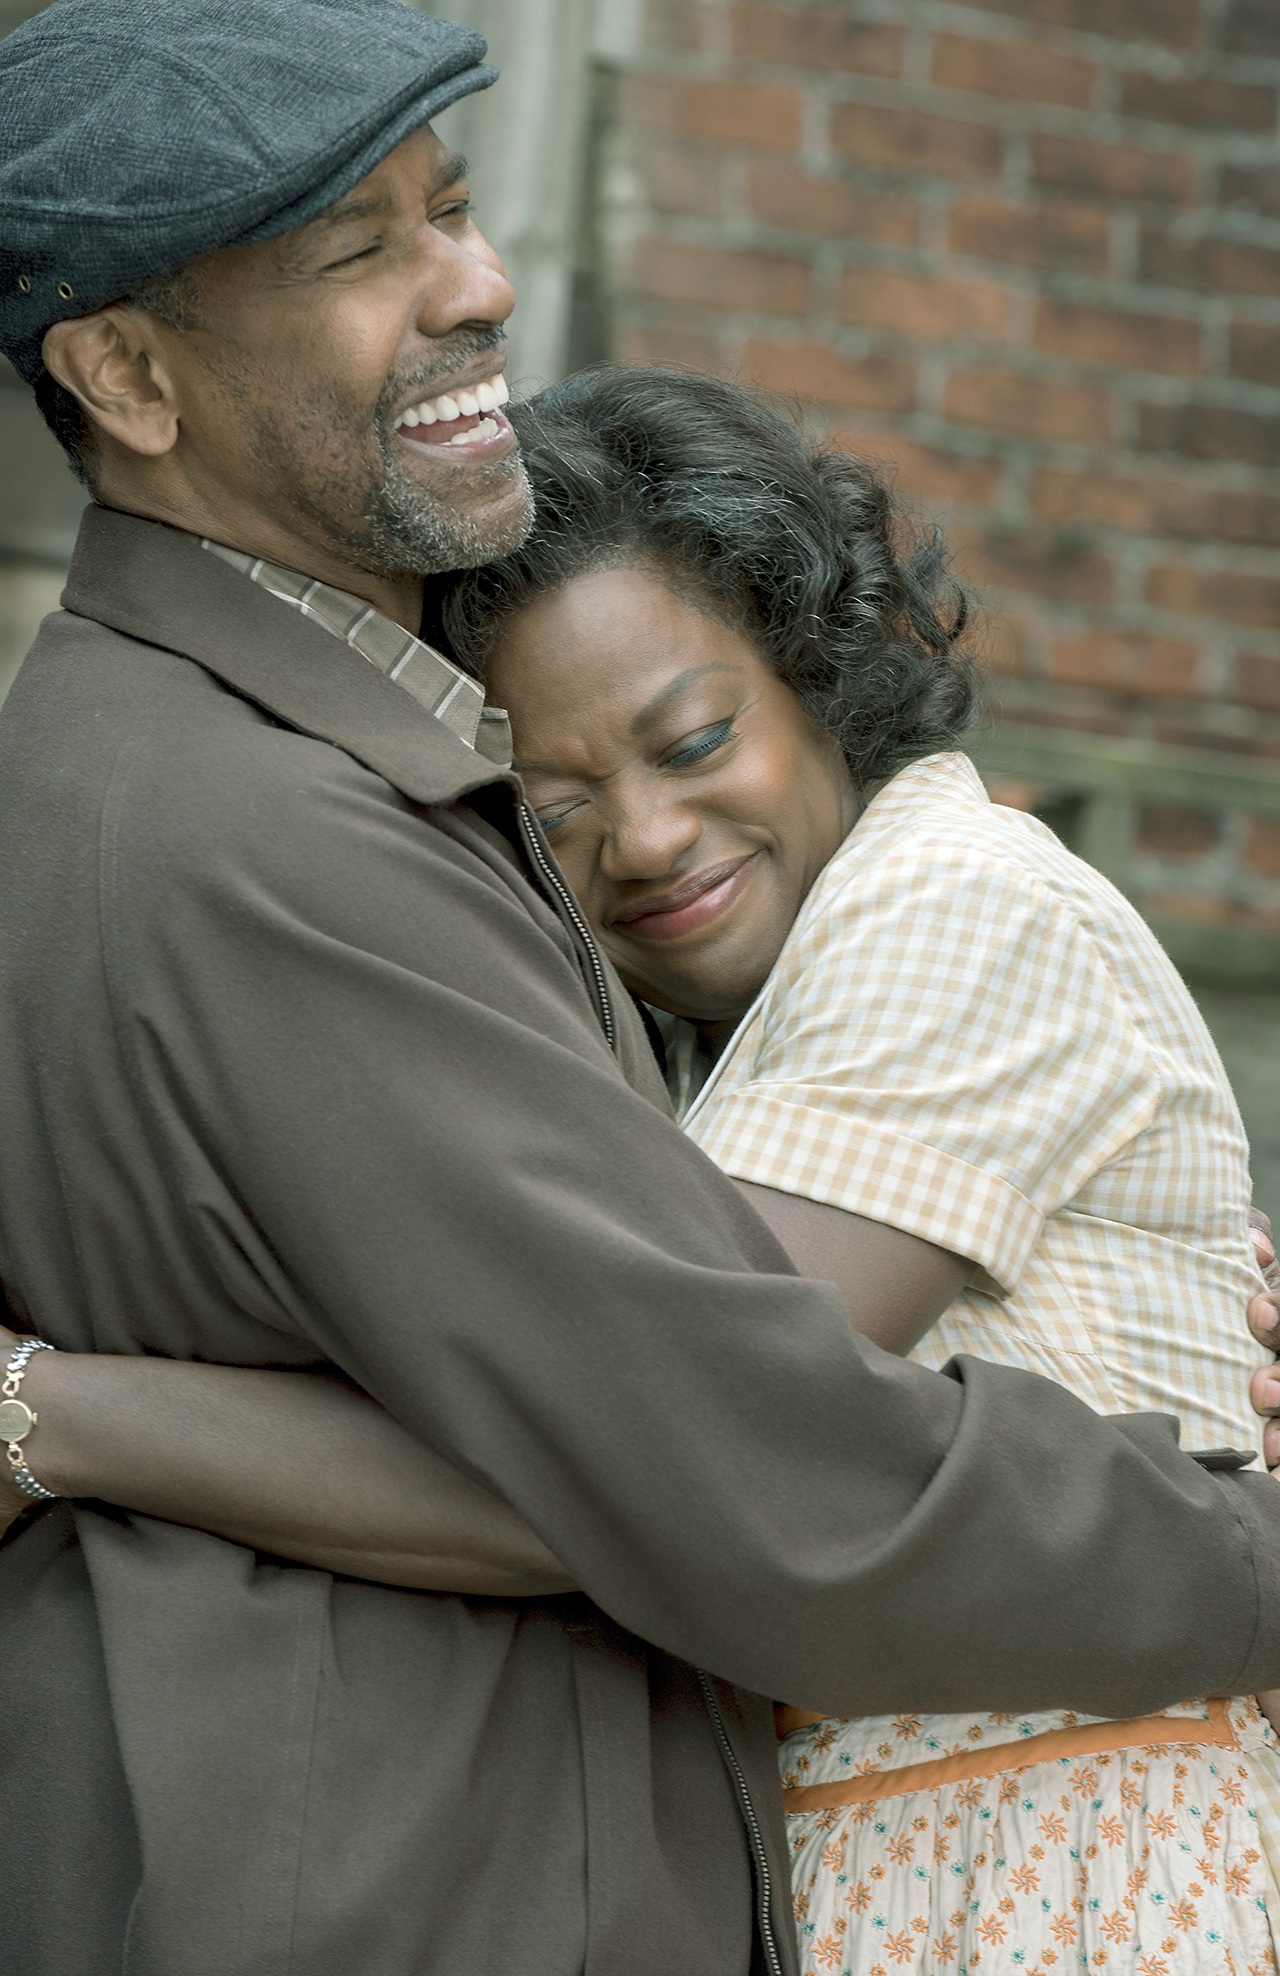 Fences Movie a perfect adaptation of great play HeraldNet